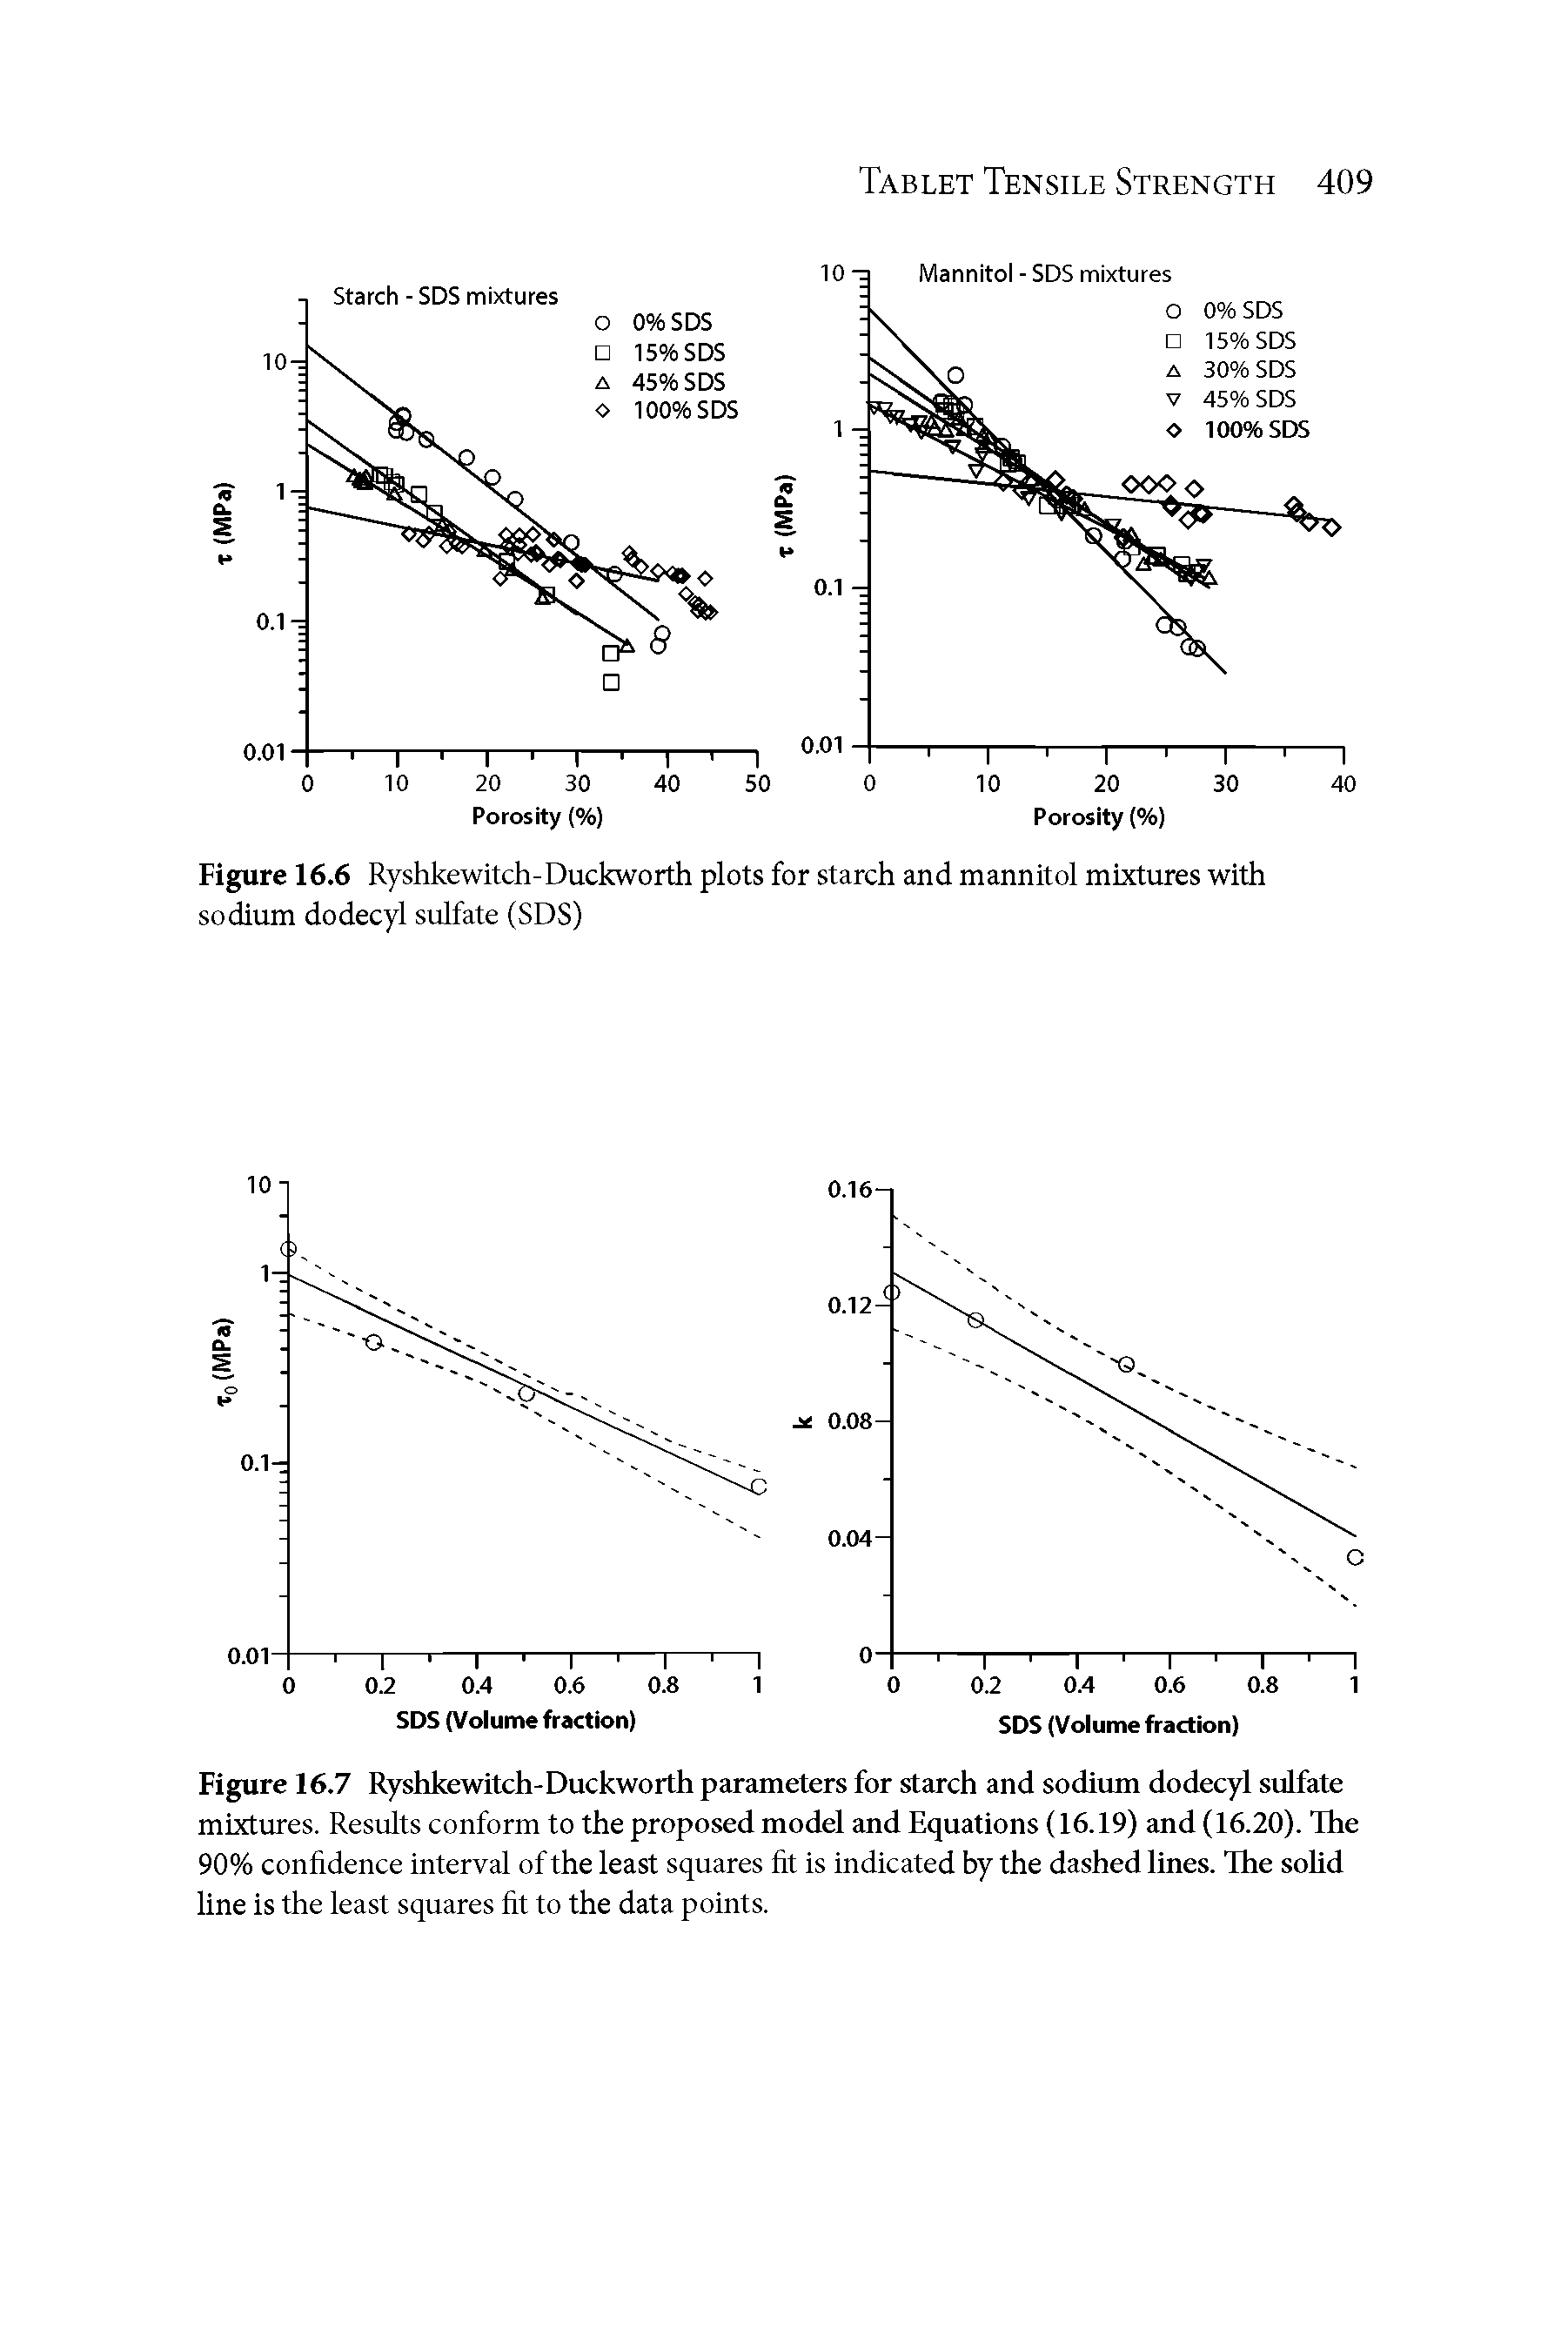 Figure 16.6 Ryshkewitch-Duckworth plots for starch and mannitol mixtures with sodium dodecyl sulfate (SDS)...